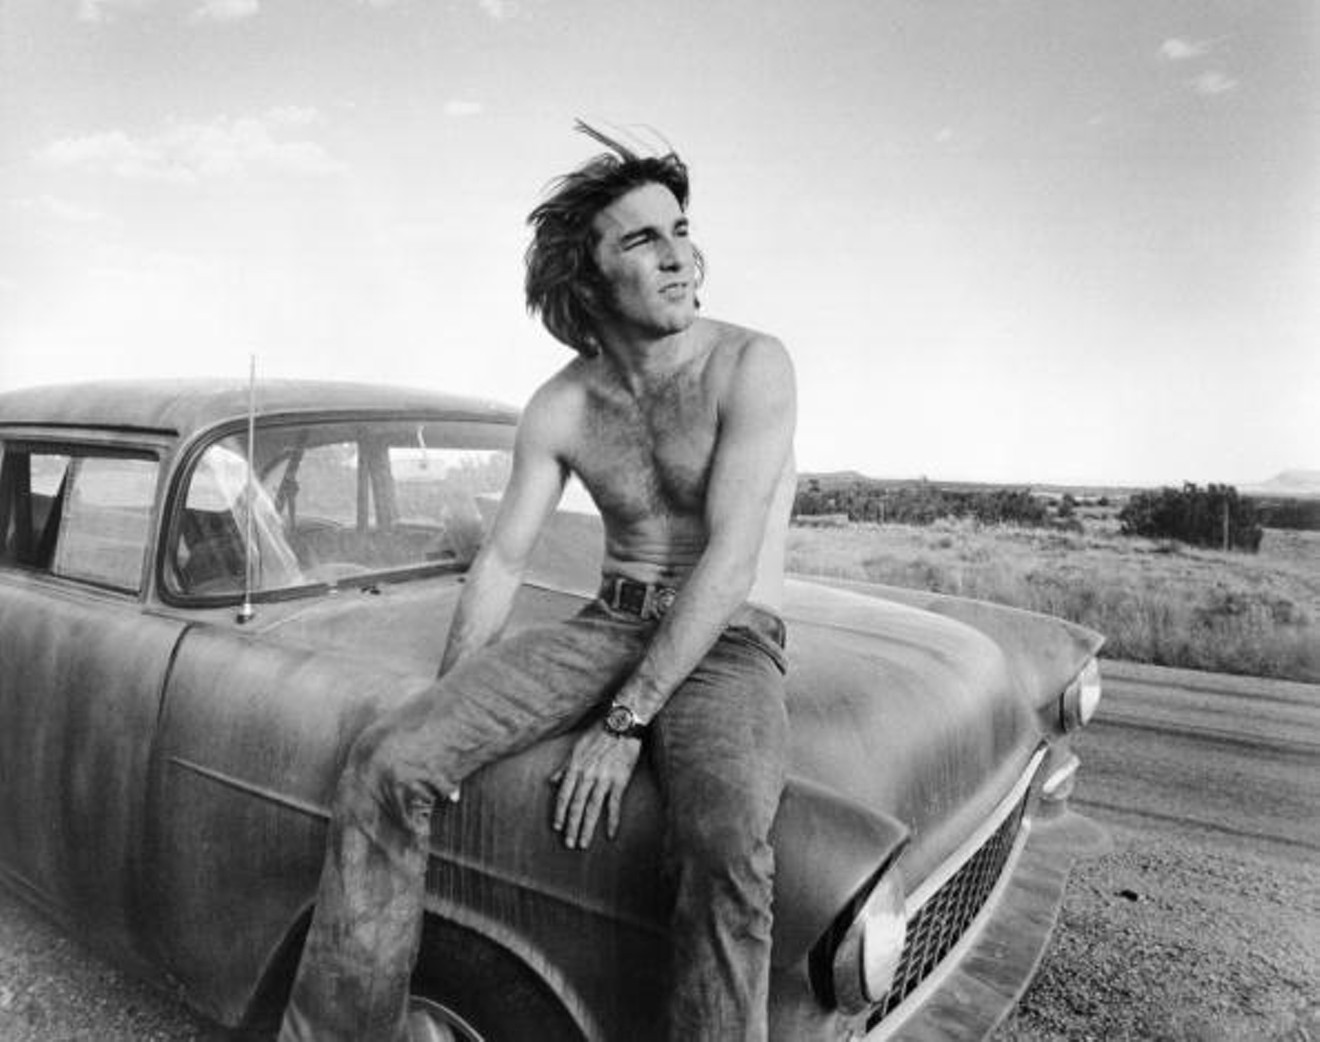 Dennis Wilson in 1971 on the set of the film Two-Lane Blacktop. His "friendship" with a pre-Helter Skelter Charles Manson was one of the more bizarre couplings in 1960s Los Angeles.